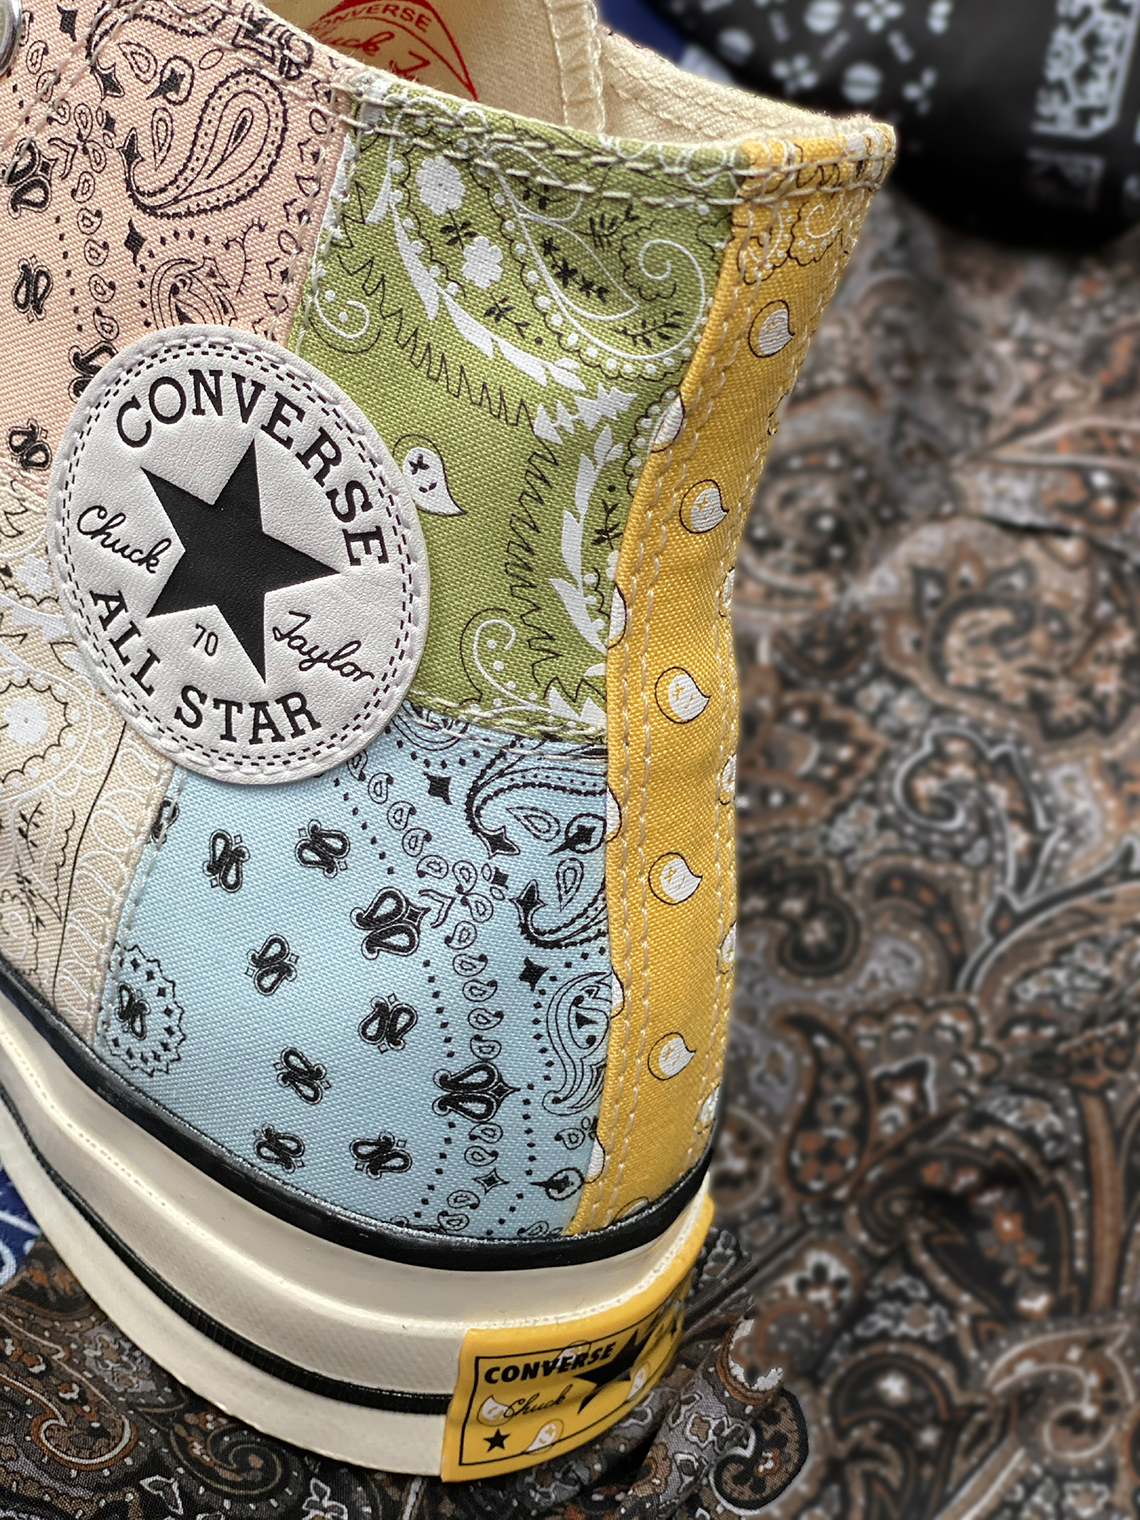 Offspring and beige Converse Reveal New GLF 2.0 Sneaker Paisley Bandana 9